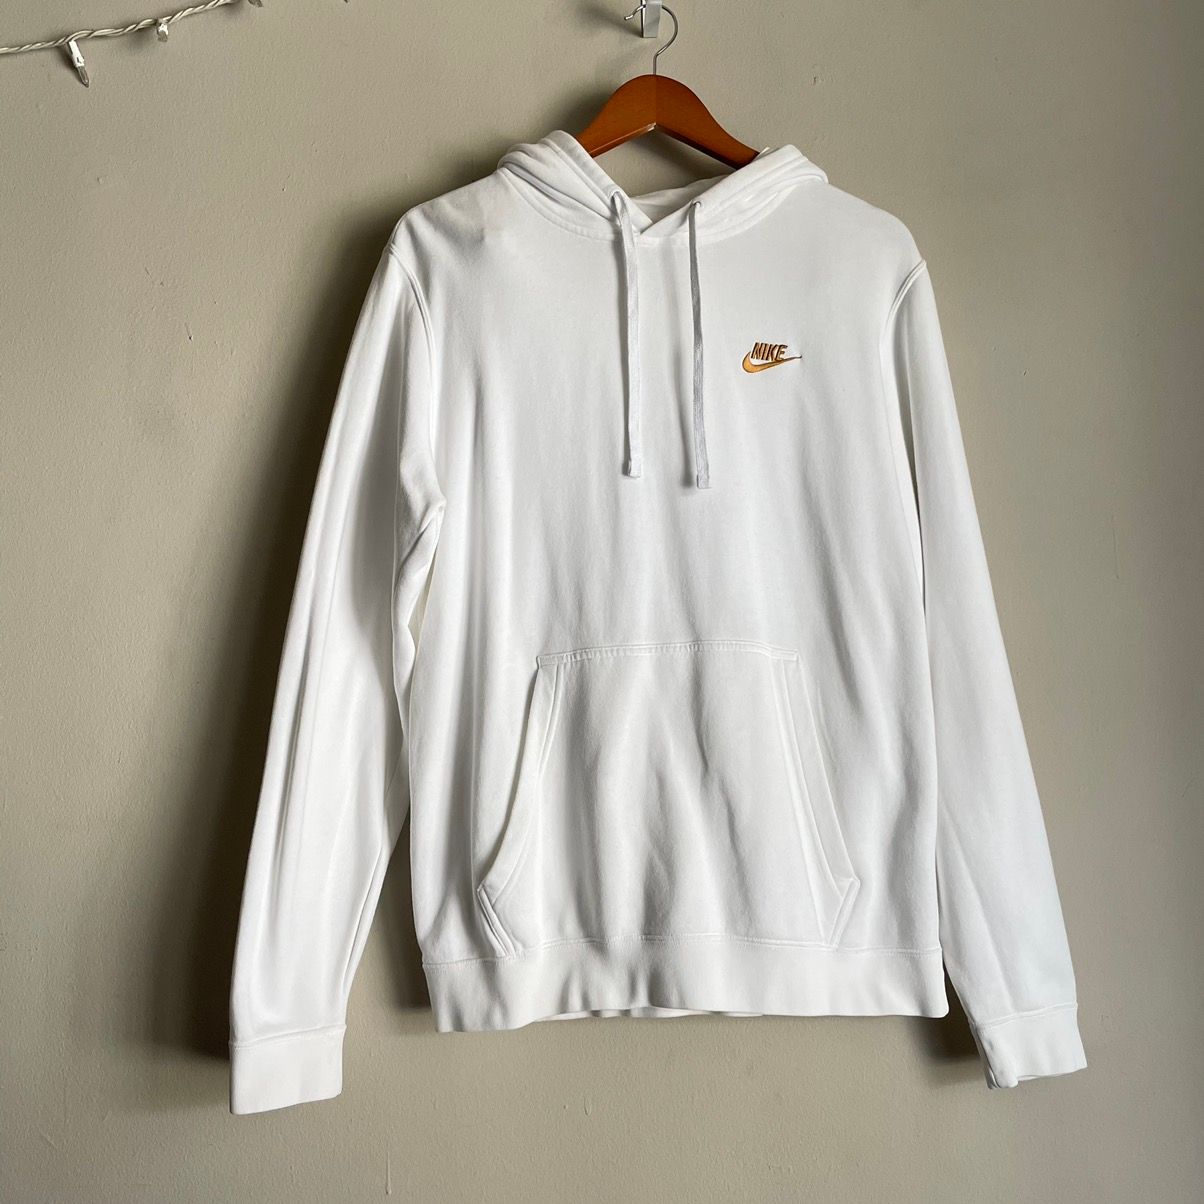 Nike NIKE WHITE HOODIE WITH GOLD EMBROIDERY | Grailed